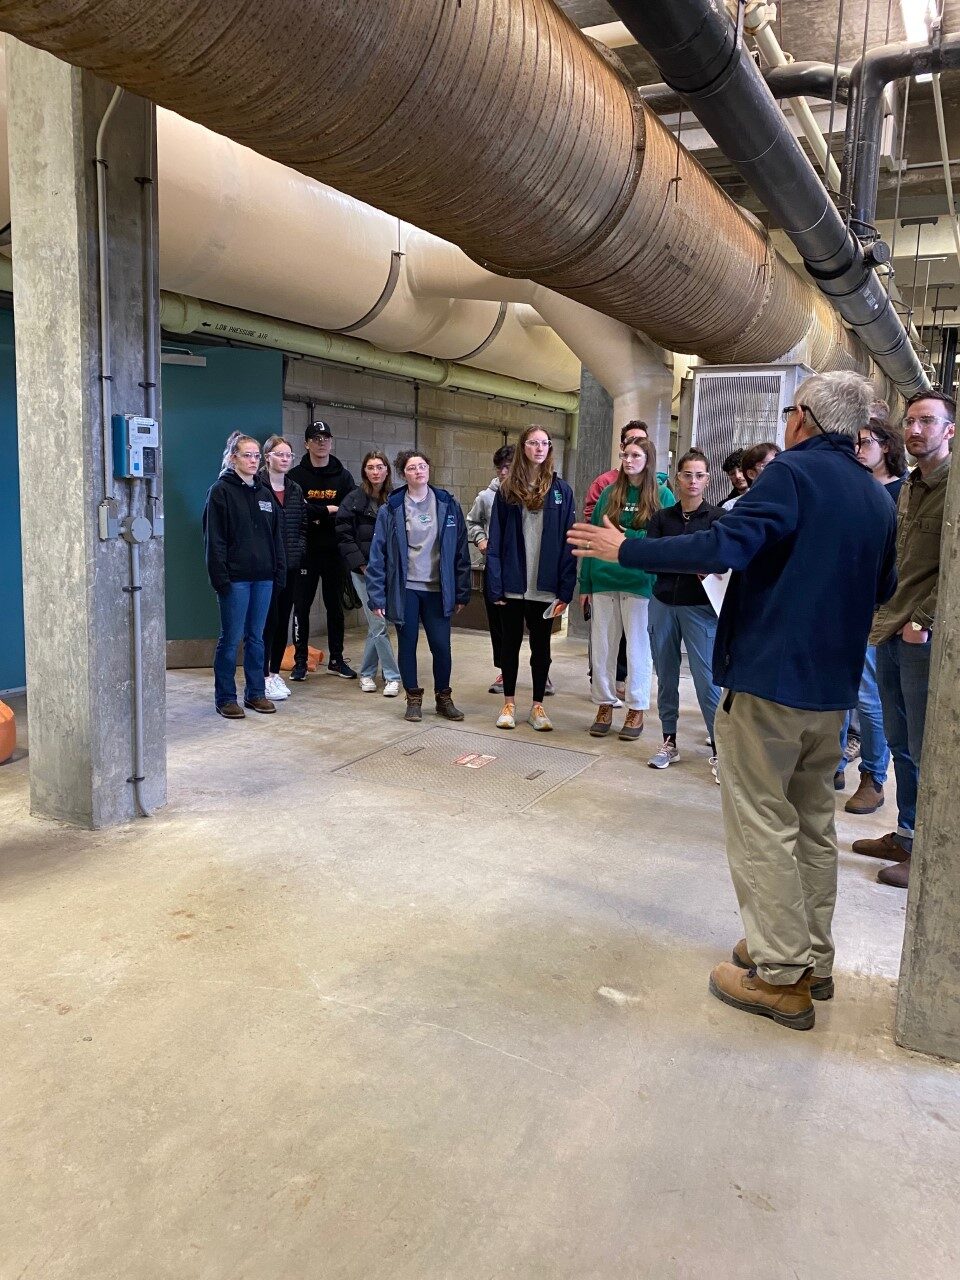 This is a photo of an Endicott College class on a tour of the Effluent Building at South Essex Sewerage District. District Engineer, Mike Wilson, leads the discussion as students and professor look around a large room full of enormous pipes.